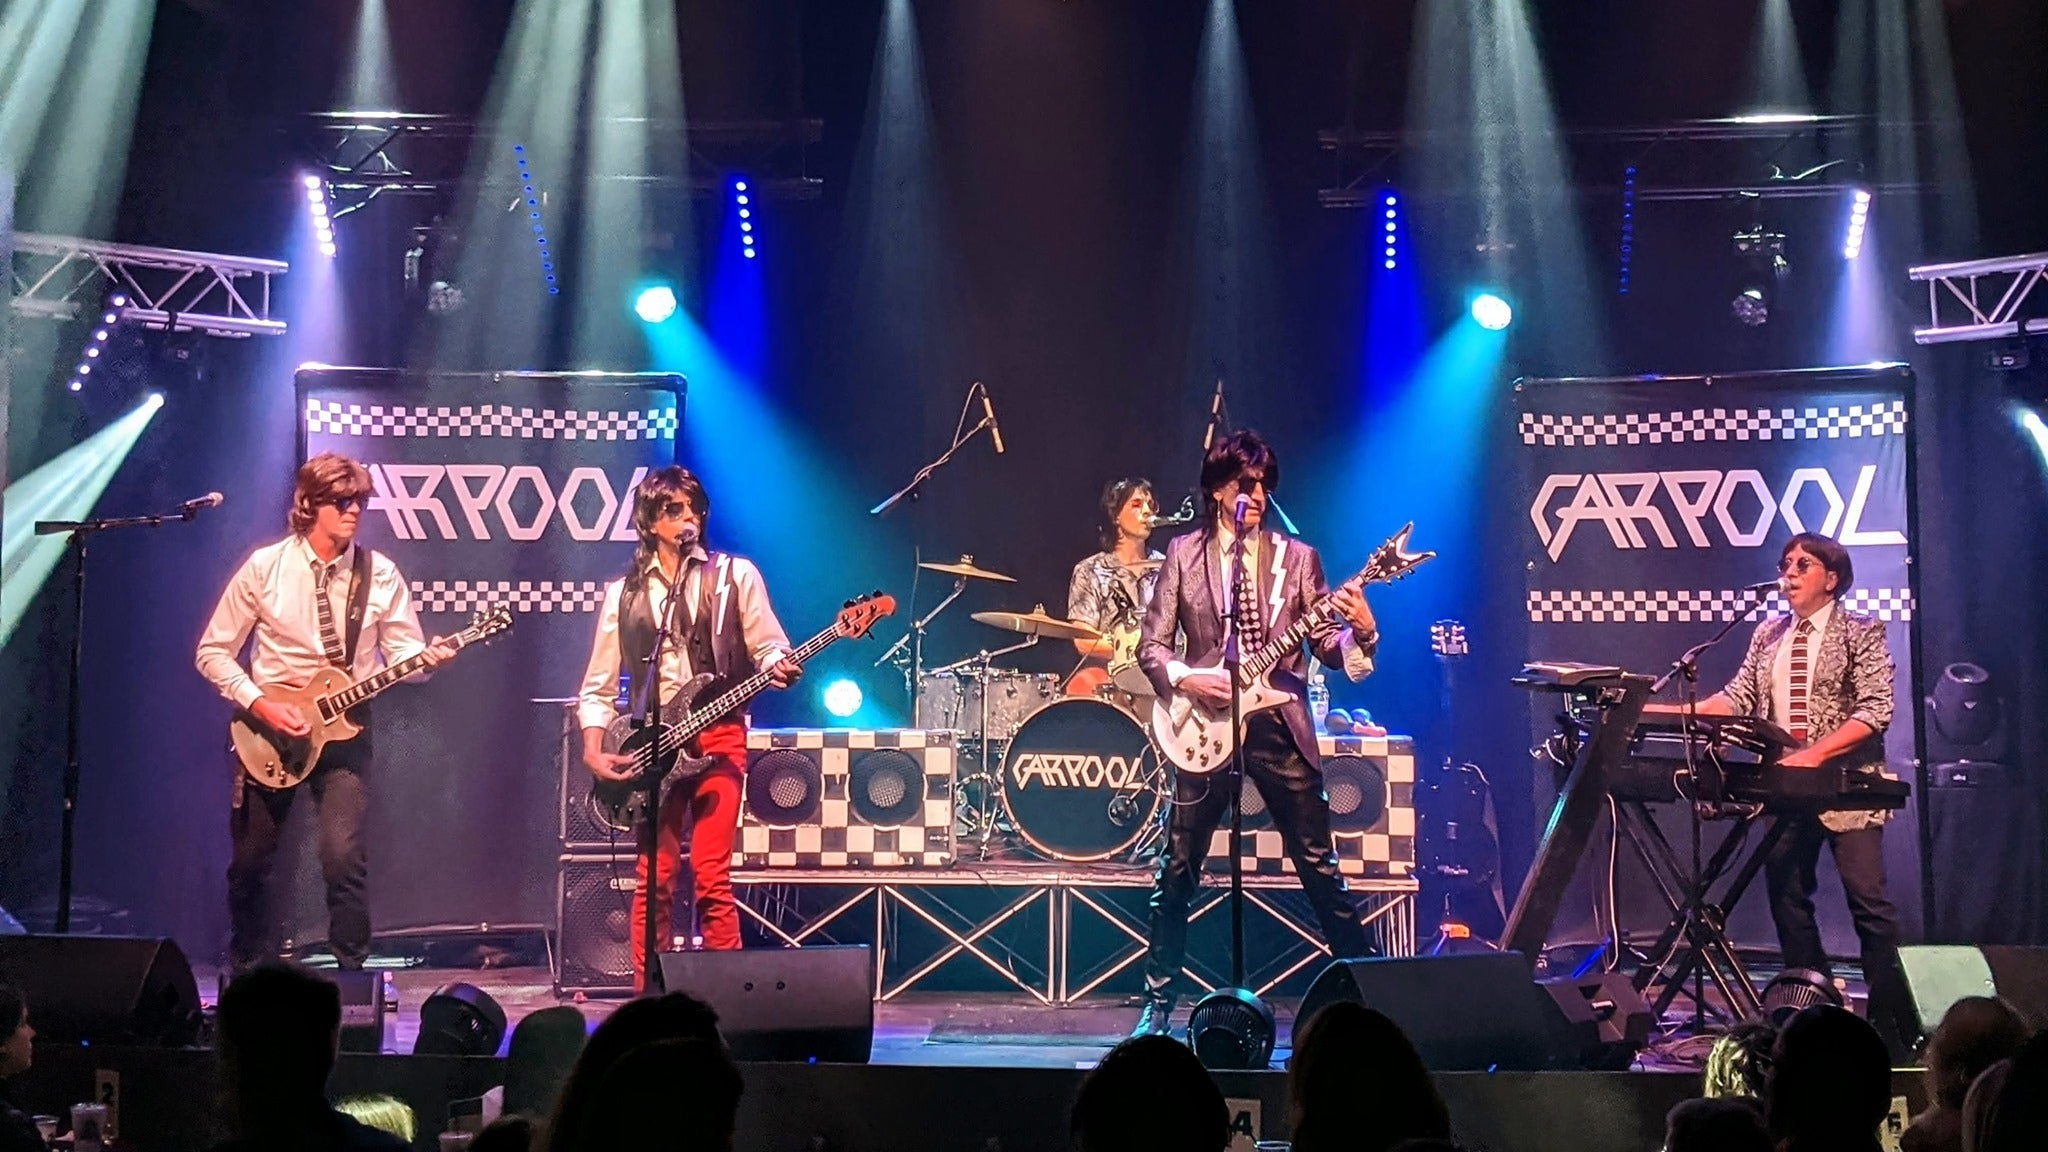 An Evening With Carpool - A Cars Tribute Band